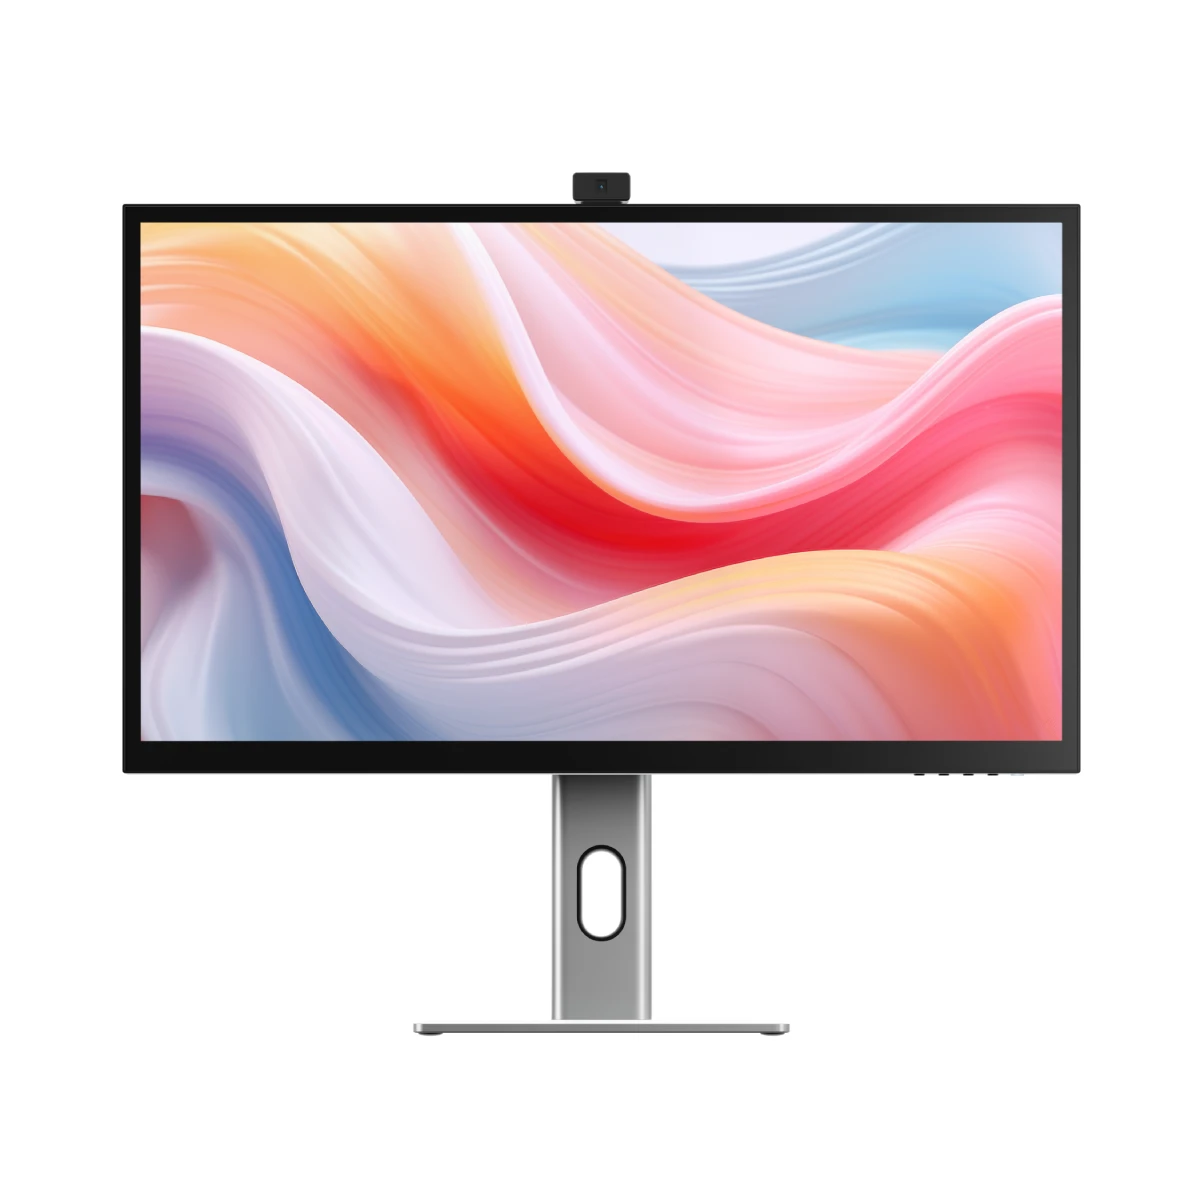 clarity-pro-27-uhd-4k-monitor-with-65w-pd-and-webcam-pack-of-2_2